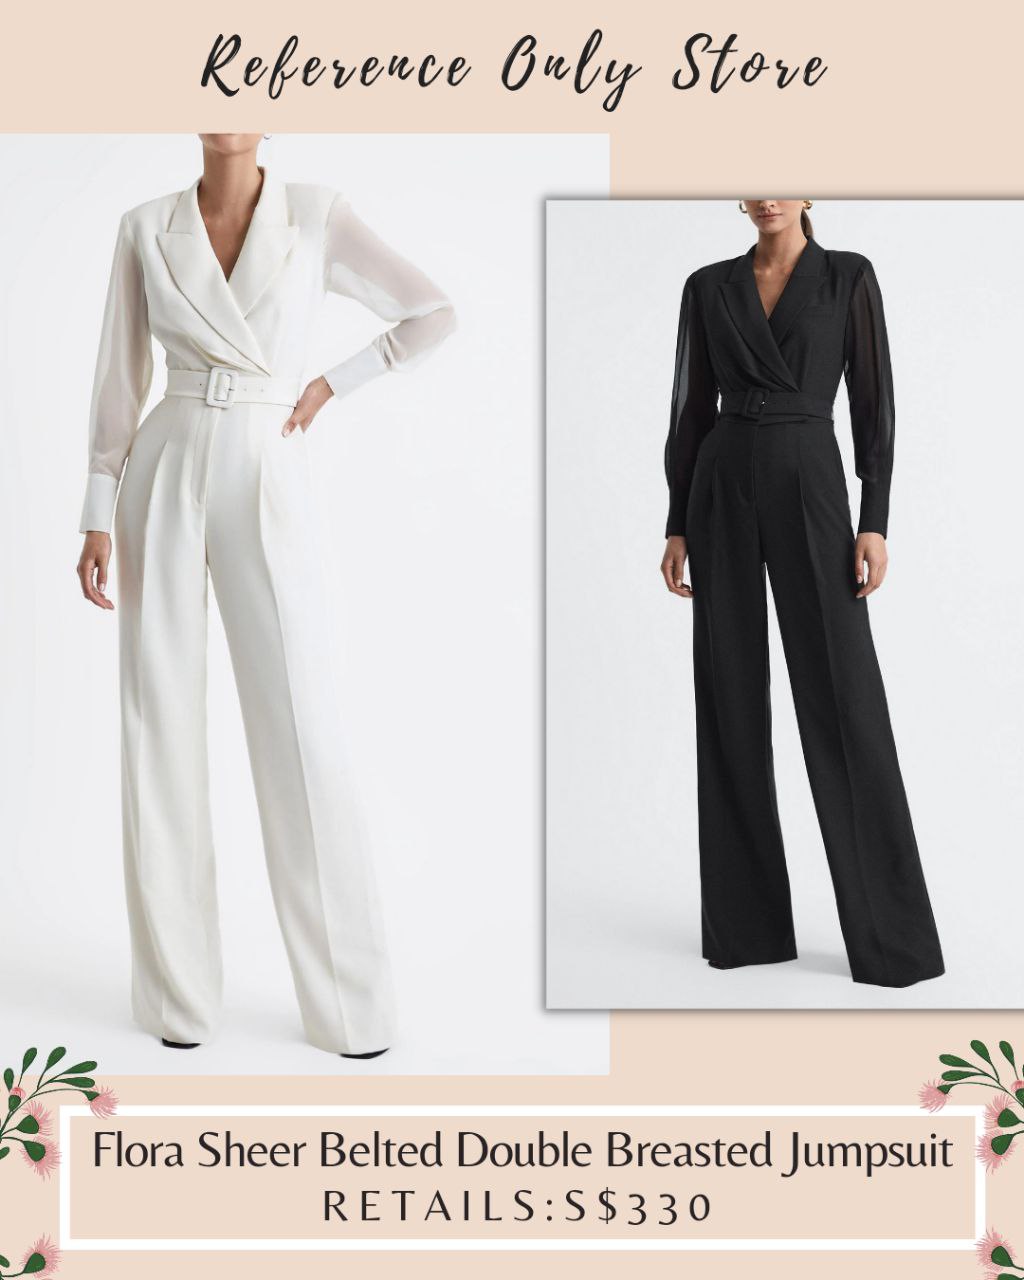 RS Flora Sheer Belted Double Breasted Jumpsuit